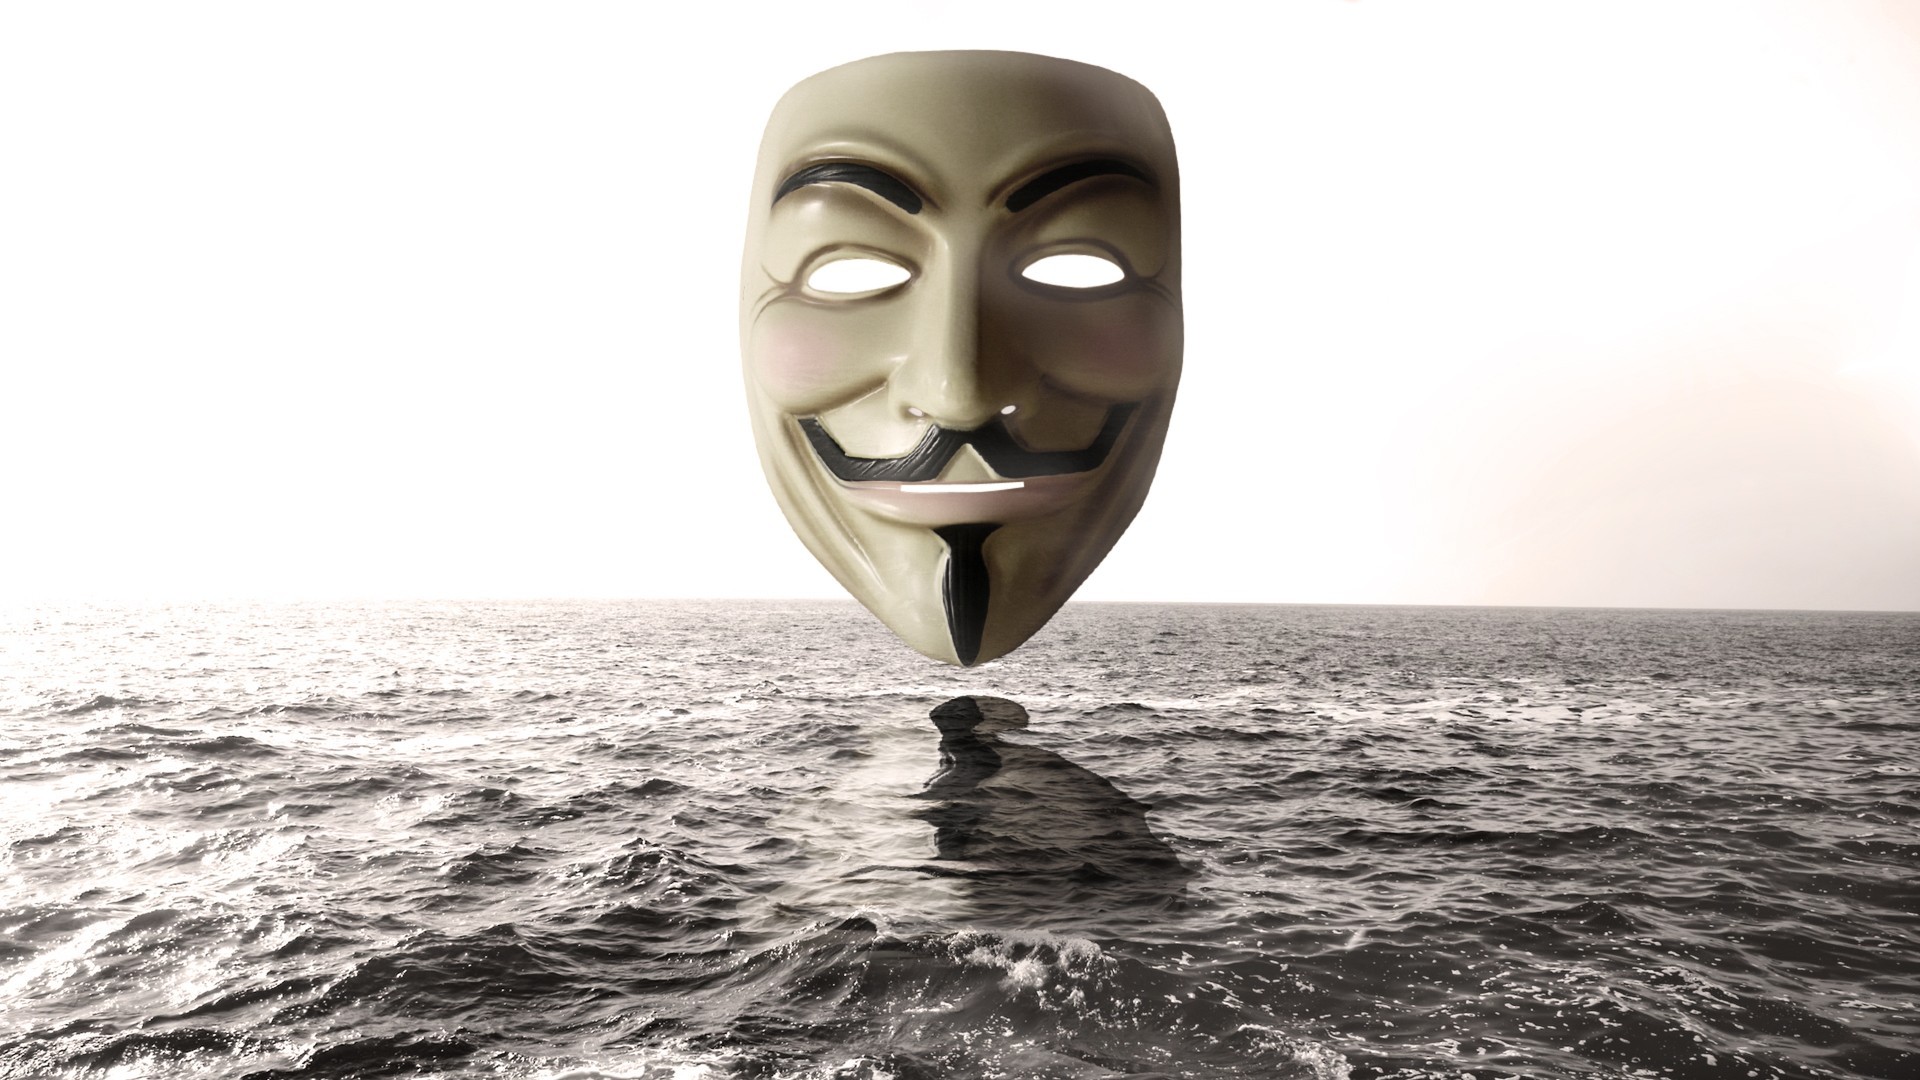 Anonymous Wallpaper Hd For Iphone Pixelstalk Anonymous - Desktop Wallpaper Quotes Hd , HD Wallpaper & Backgrounds